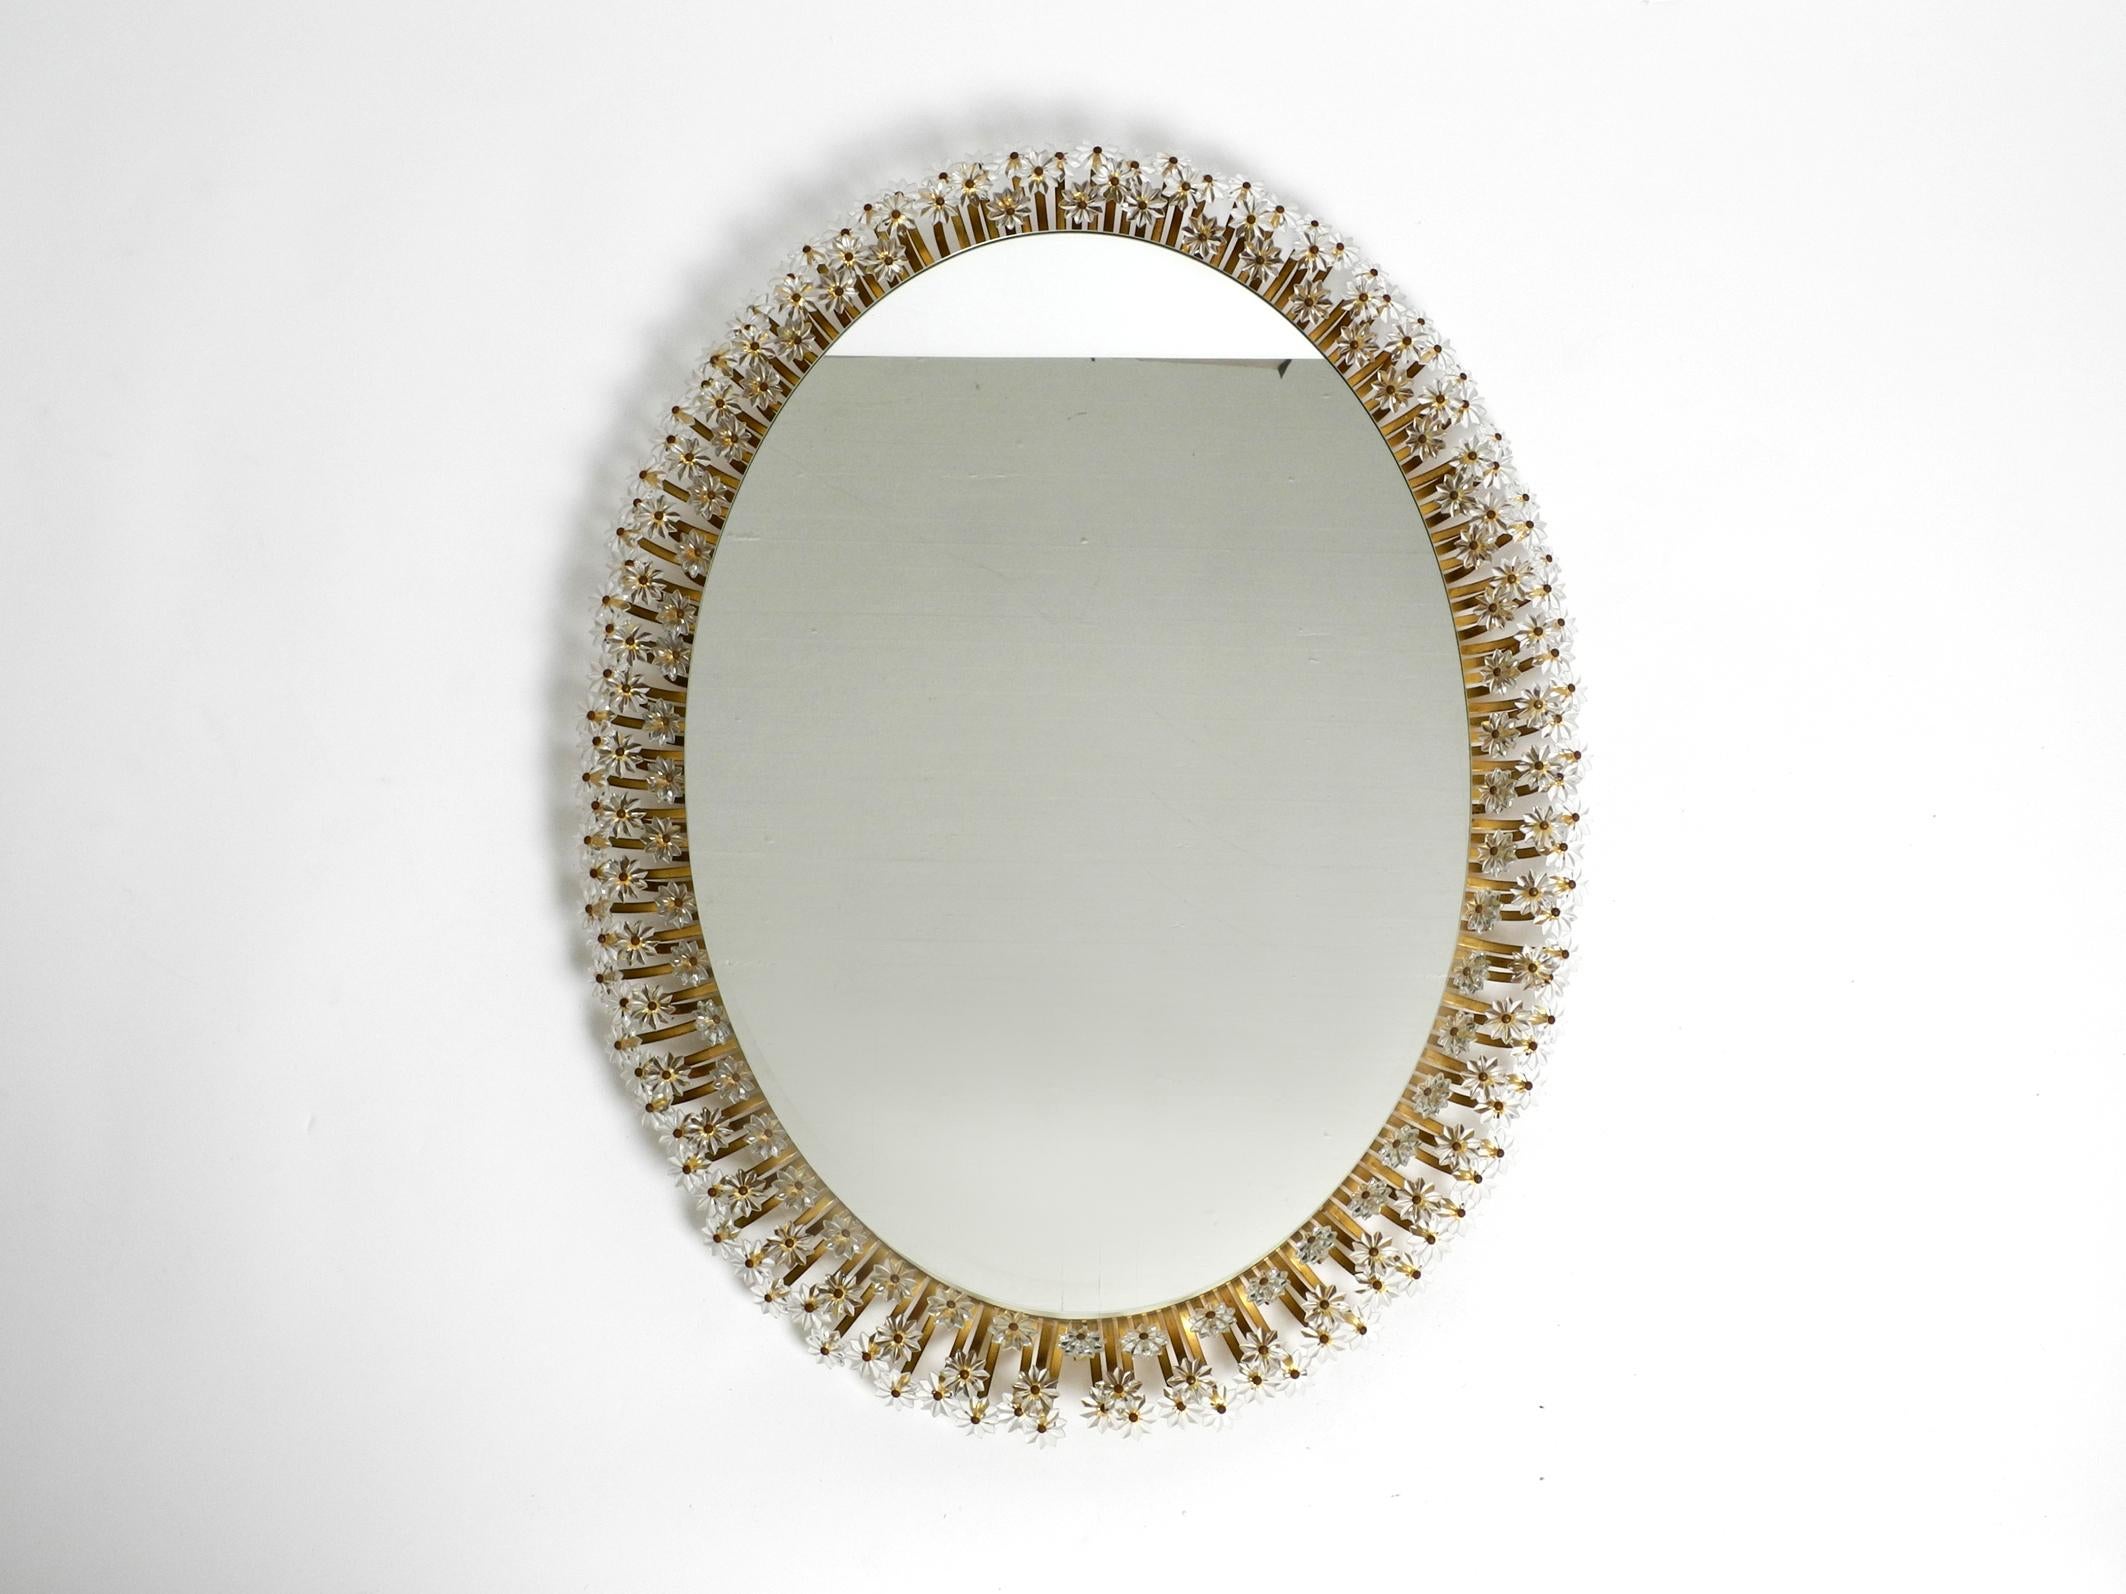 Beautiful oval backlit large Mid-Century Modern flower mirror by Schöninger.
Very rare with brass color anodized metal frame.
I've never seen one in this color. Can be hung vertically or horizontally.
Great elaborate design with many small